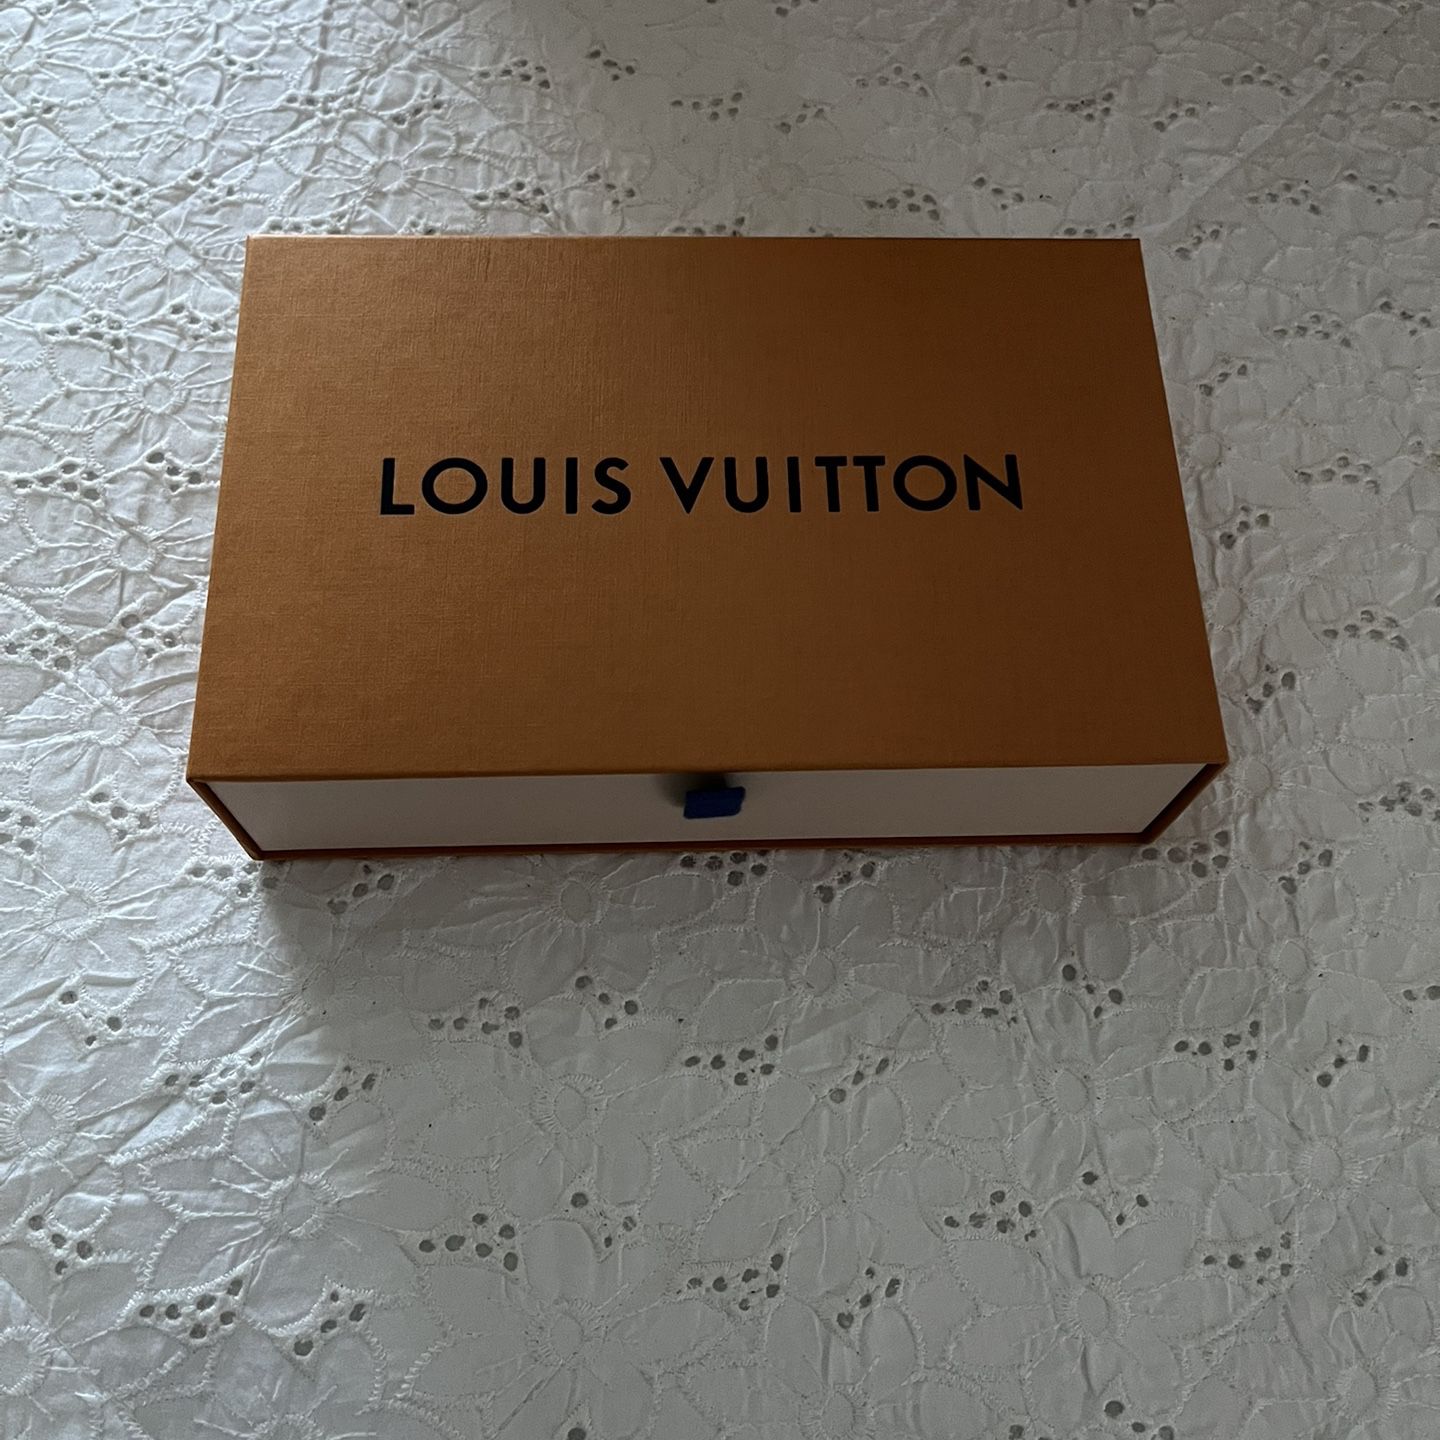 Louis Vuitton Boxes for Sale in Corona, CA - OfferUp